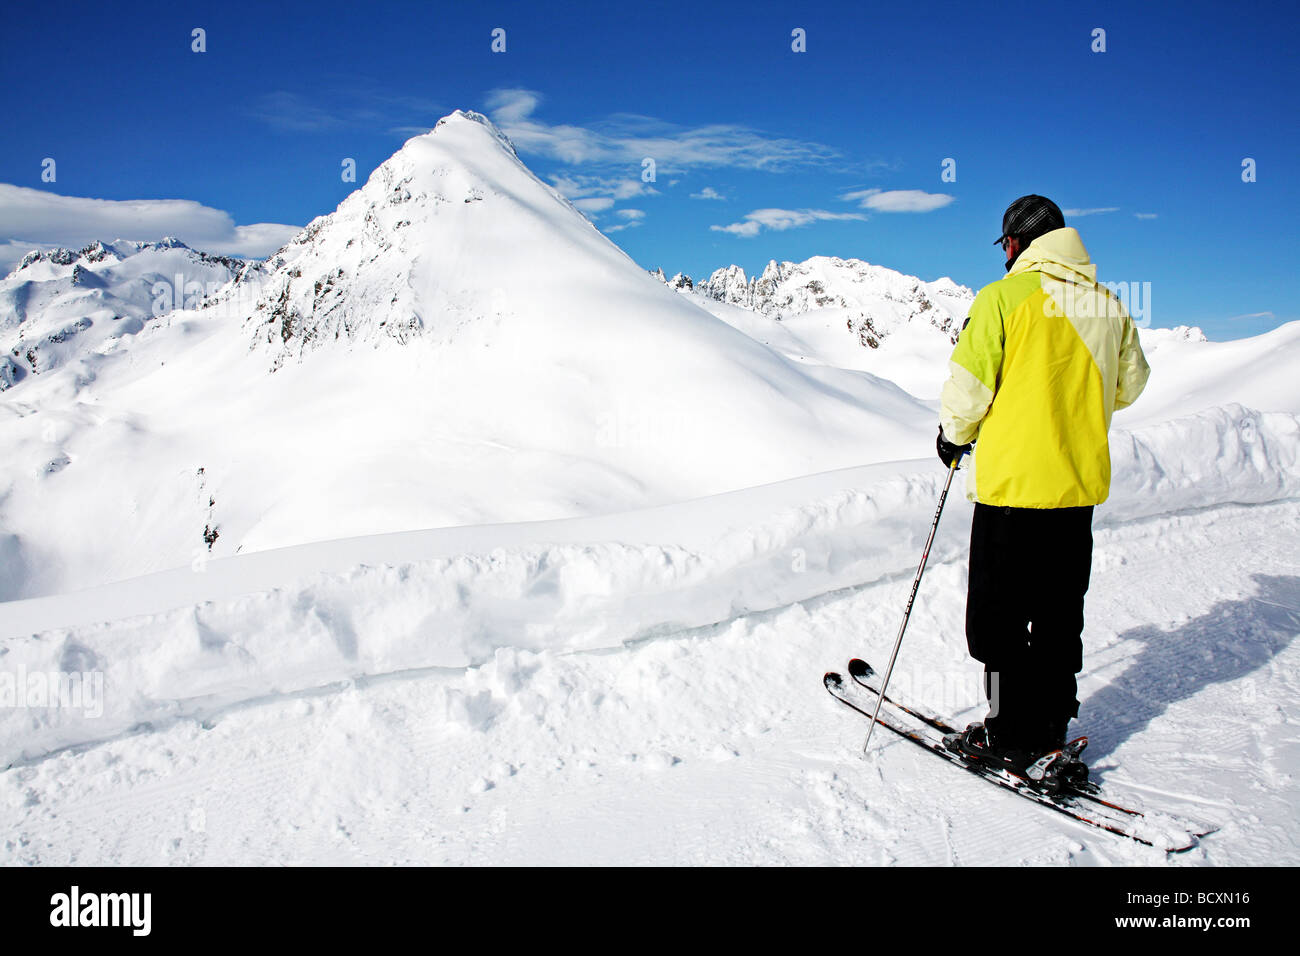 The ski resort of Cauterets in the French Pyrenees Stock Photo